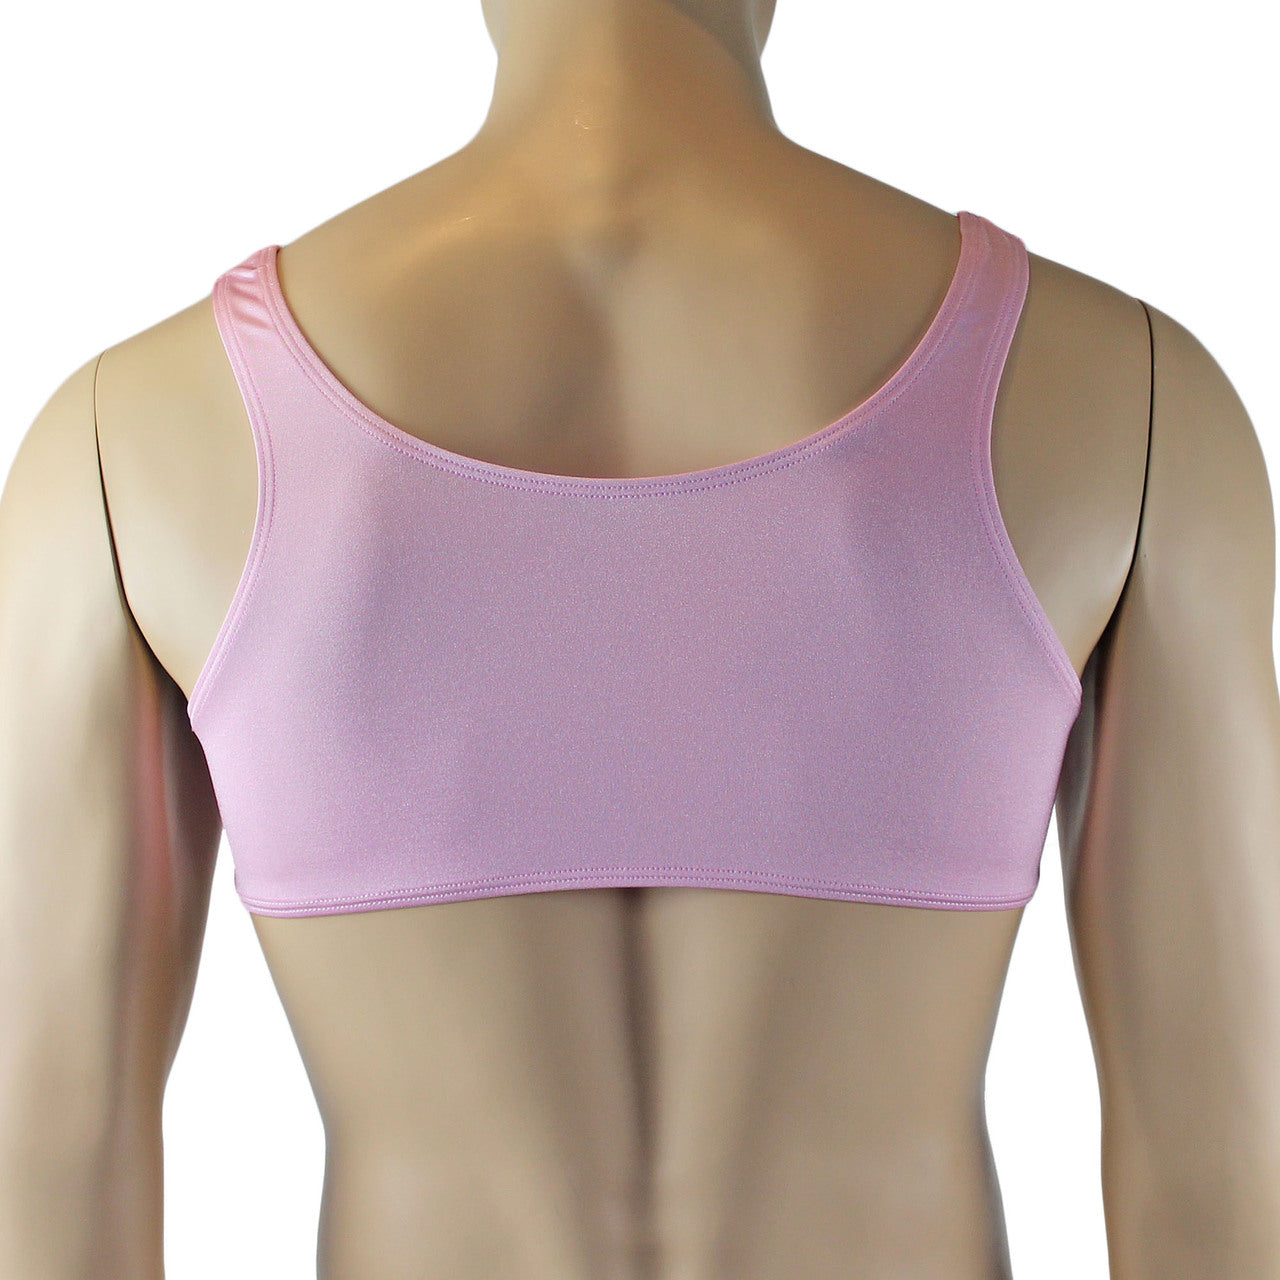 Male Angel Stretch Spandex Bra Top with Bow Pink